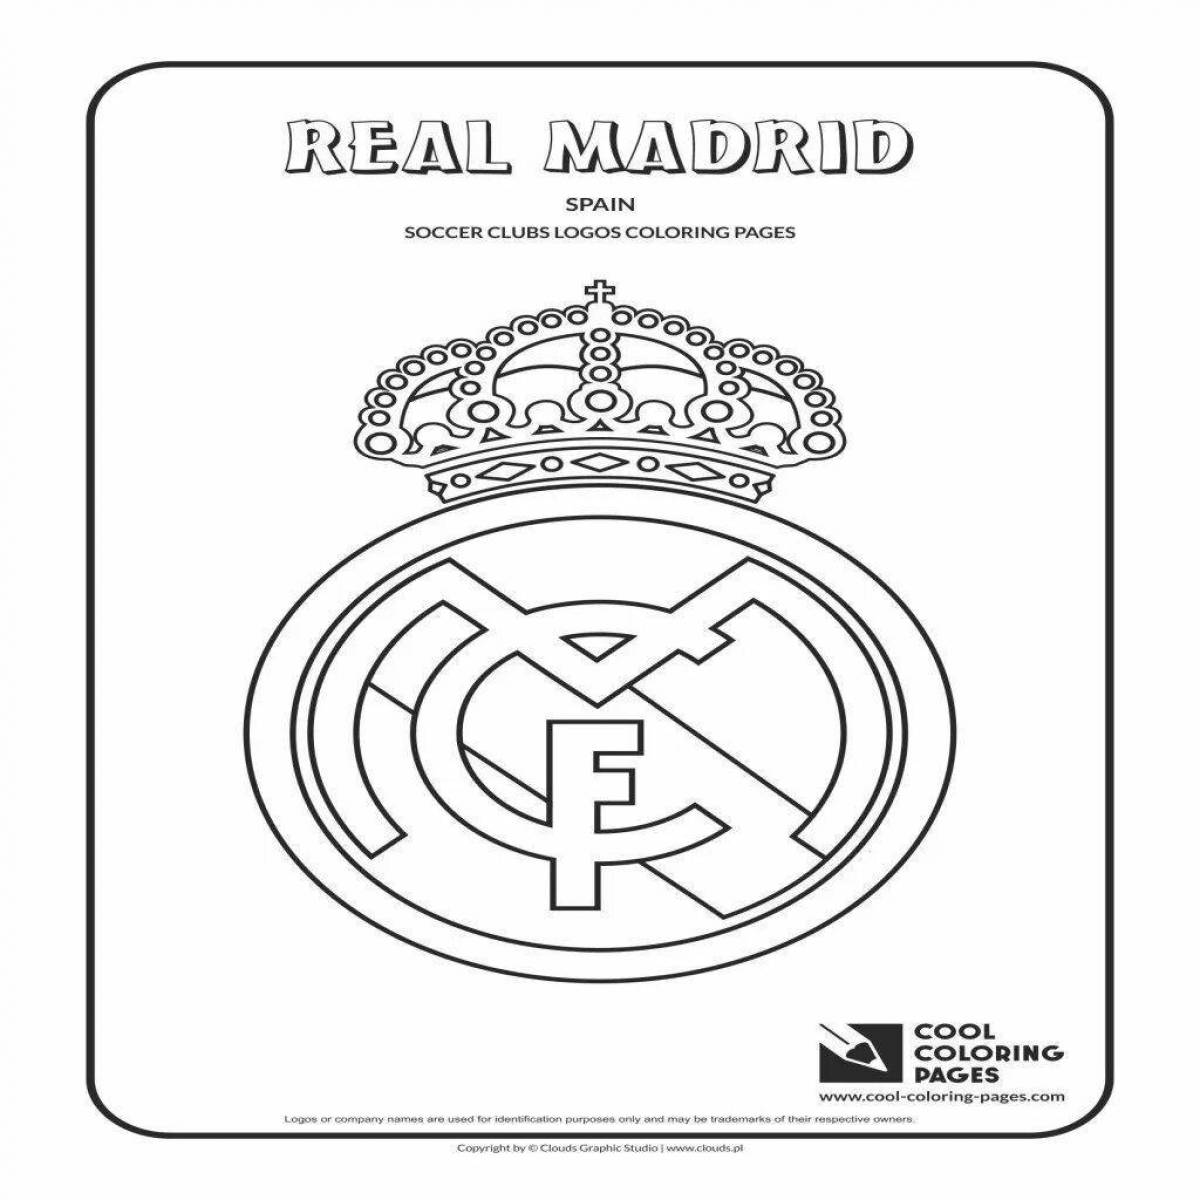 Funny real madrid coloring book